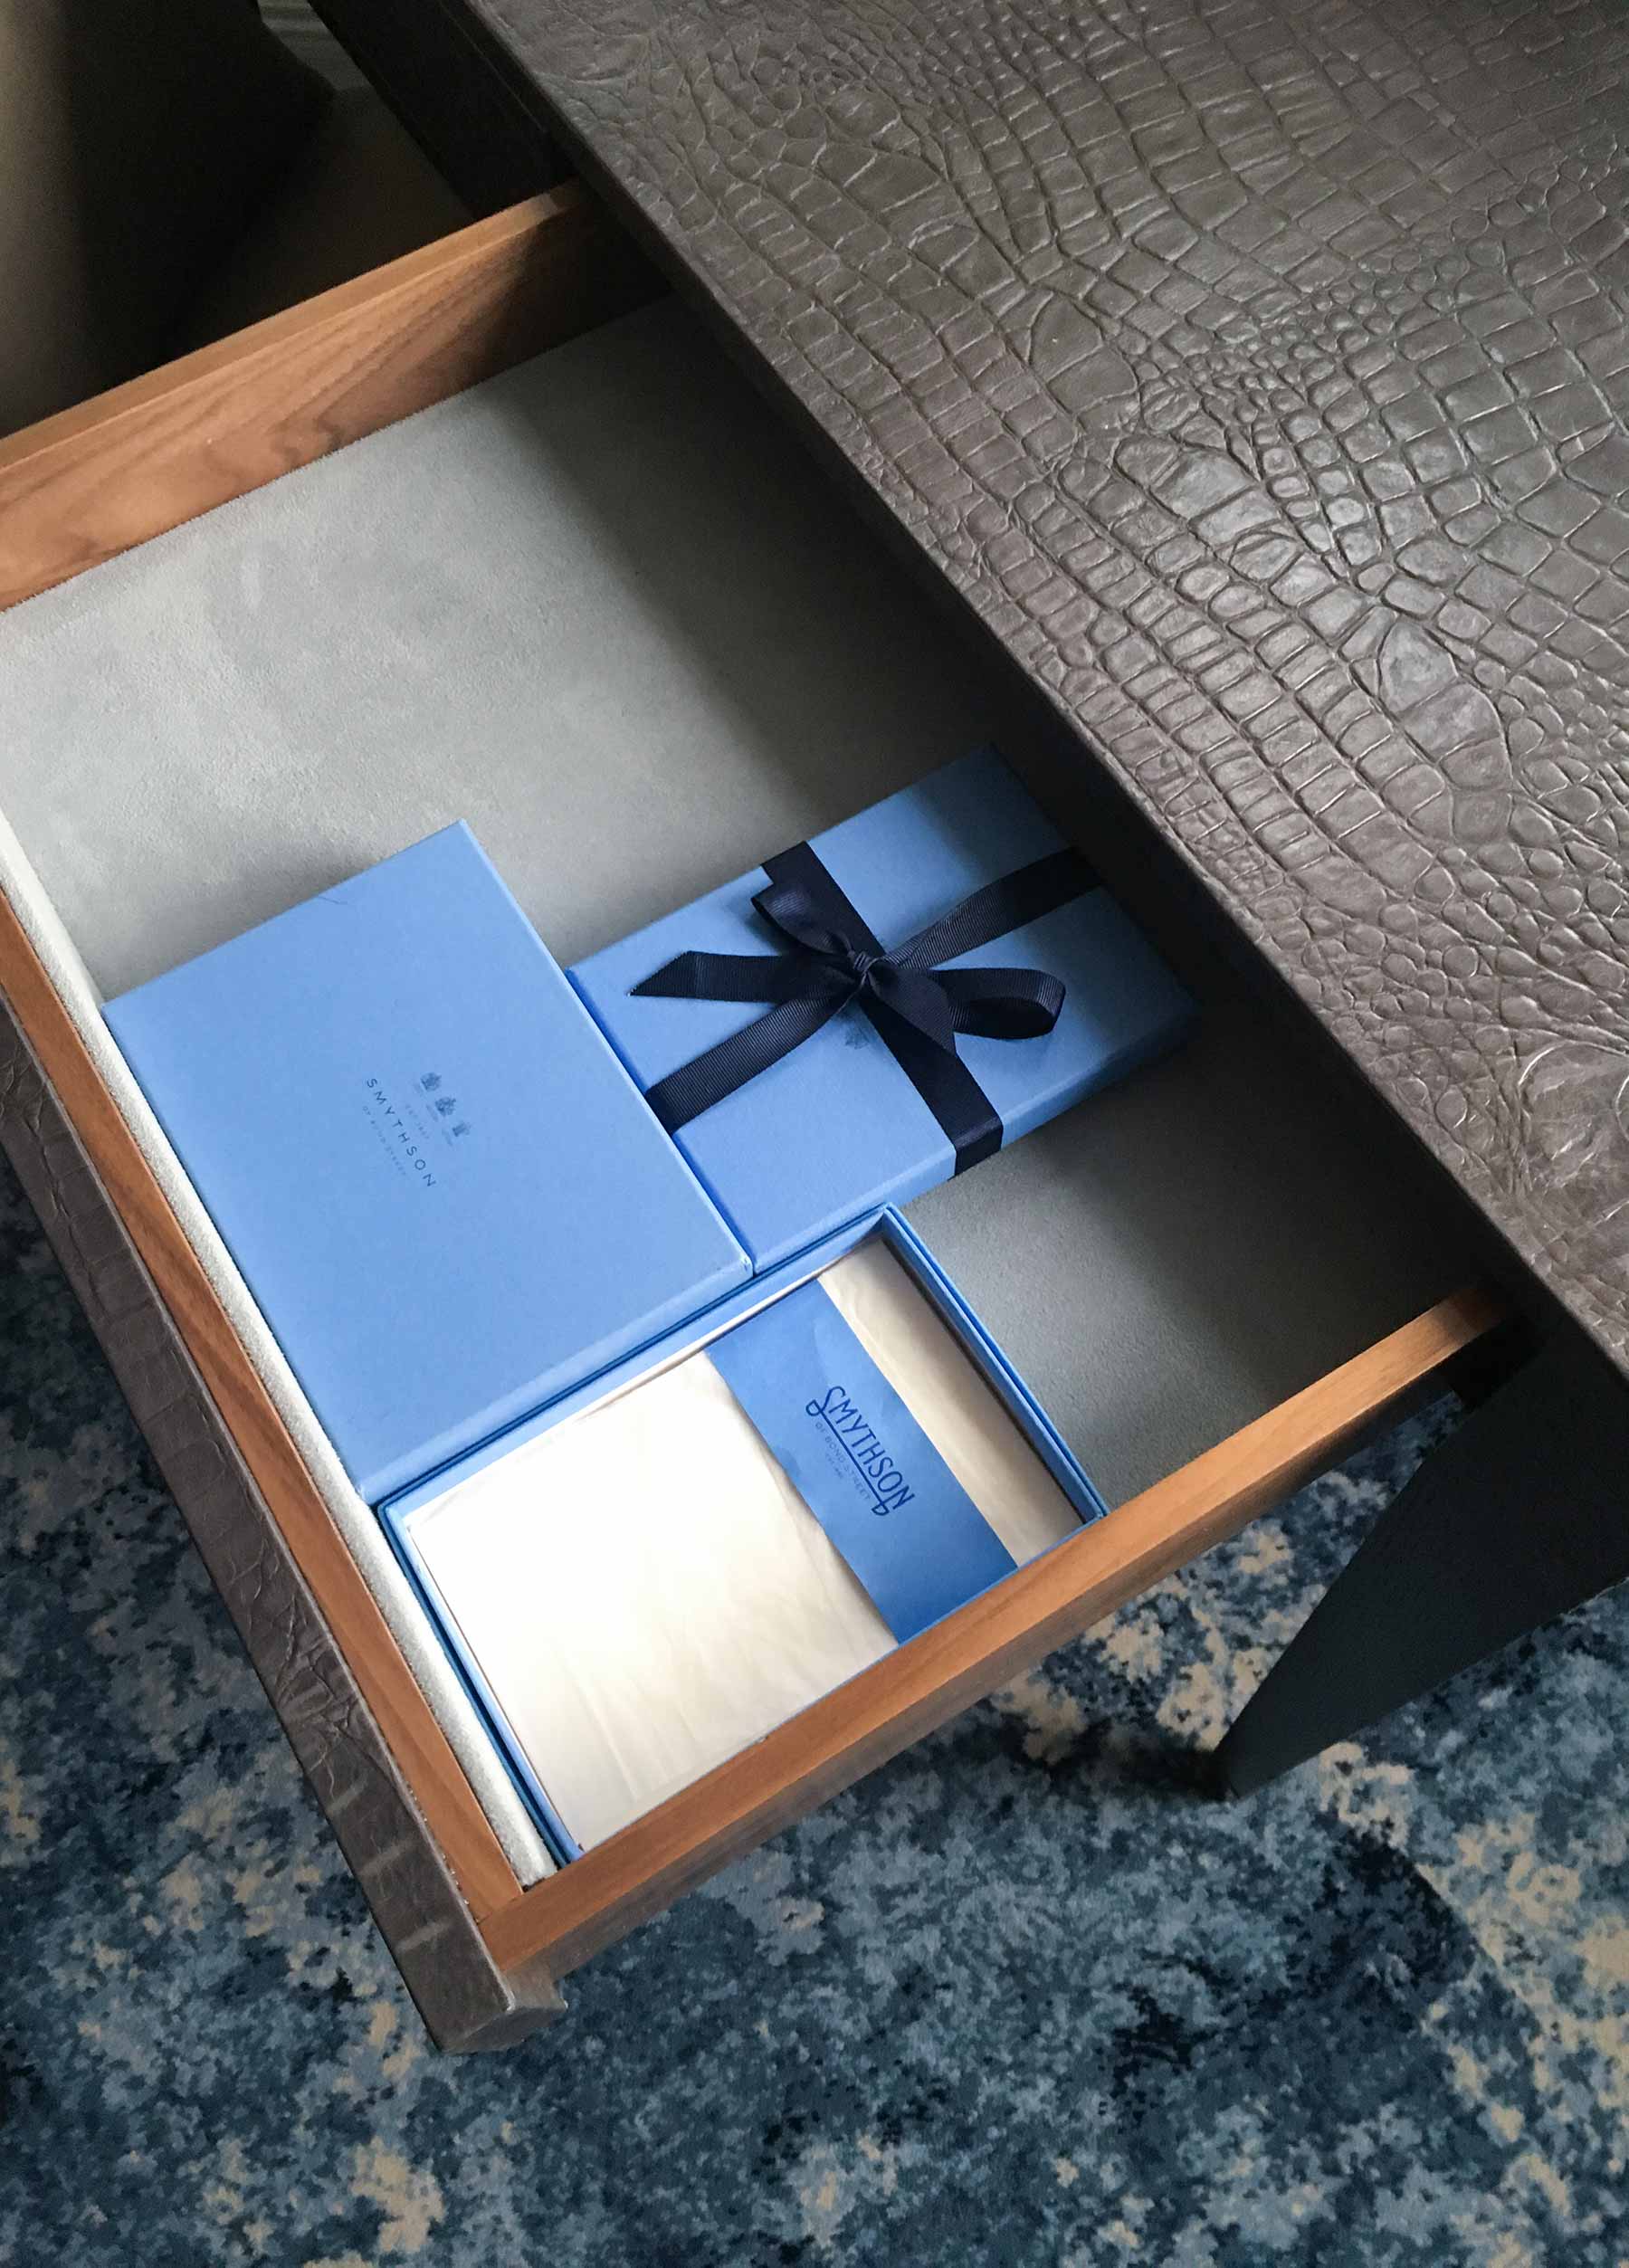 Smythson finishing touches pull together the colour scheme